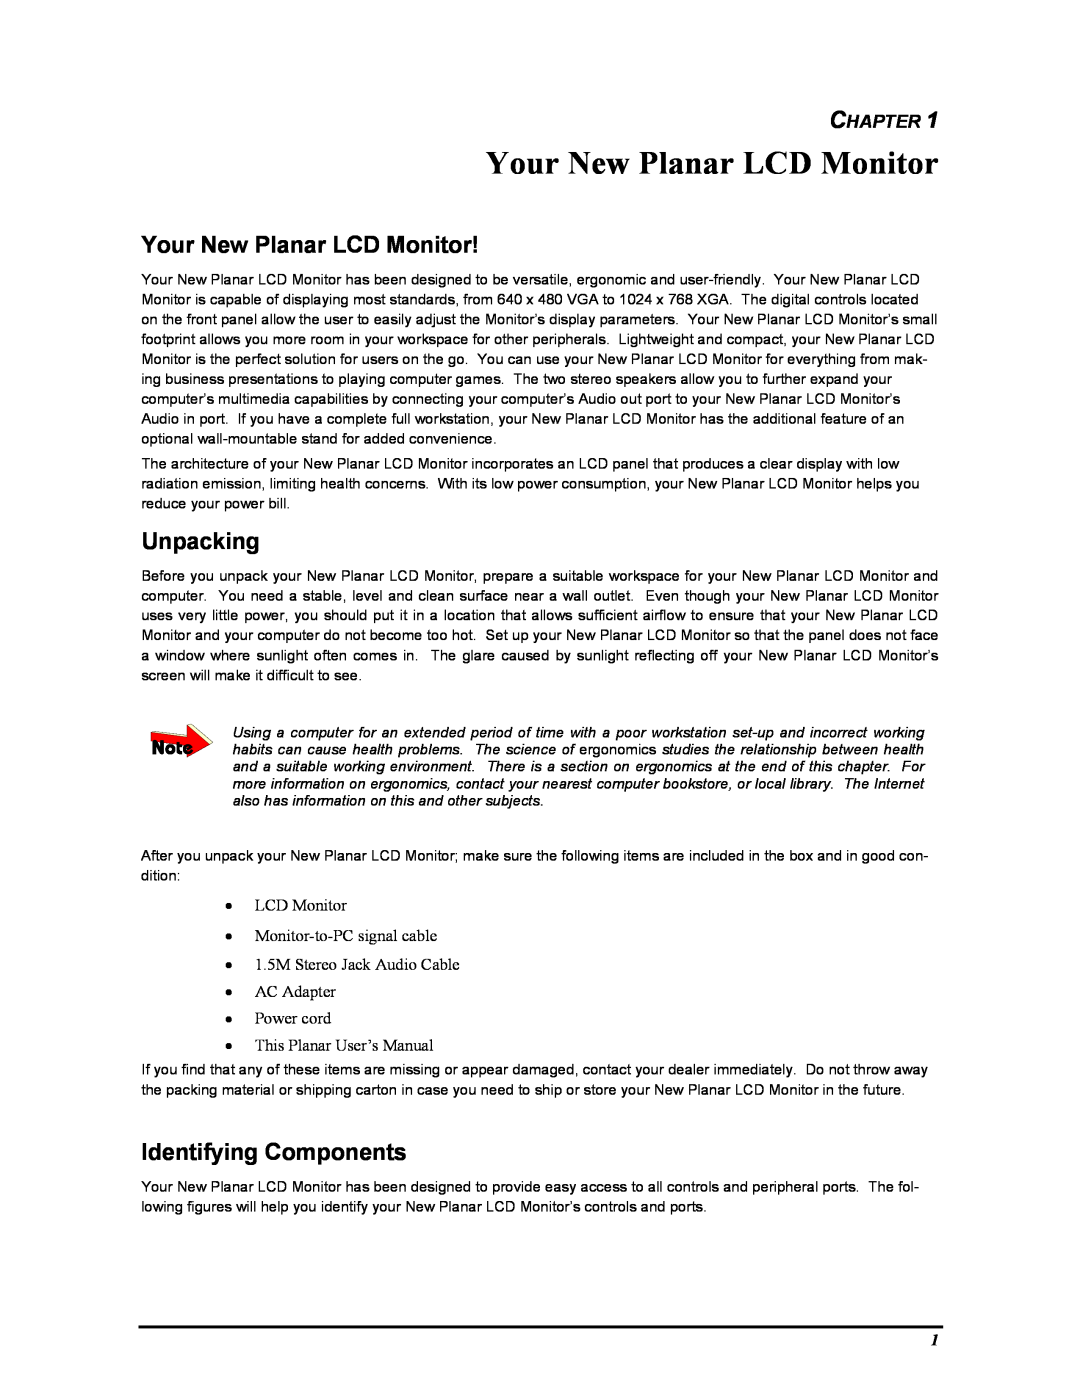 Planar FWT1503Z manual Your New Planar LCD Monitor, Unpacking, Identifying Components, Chapter 